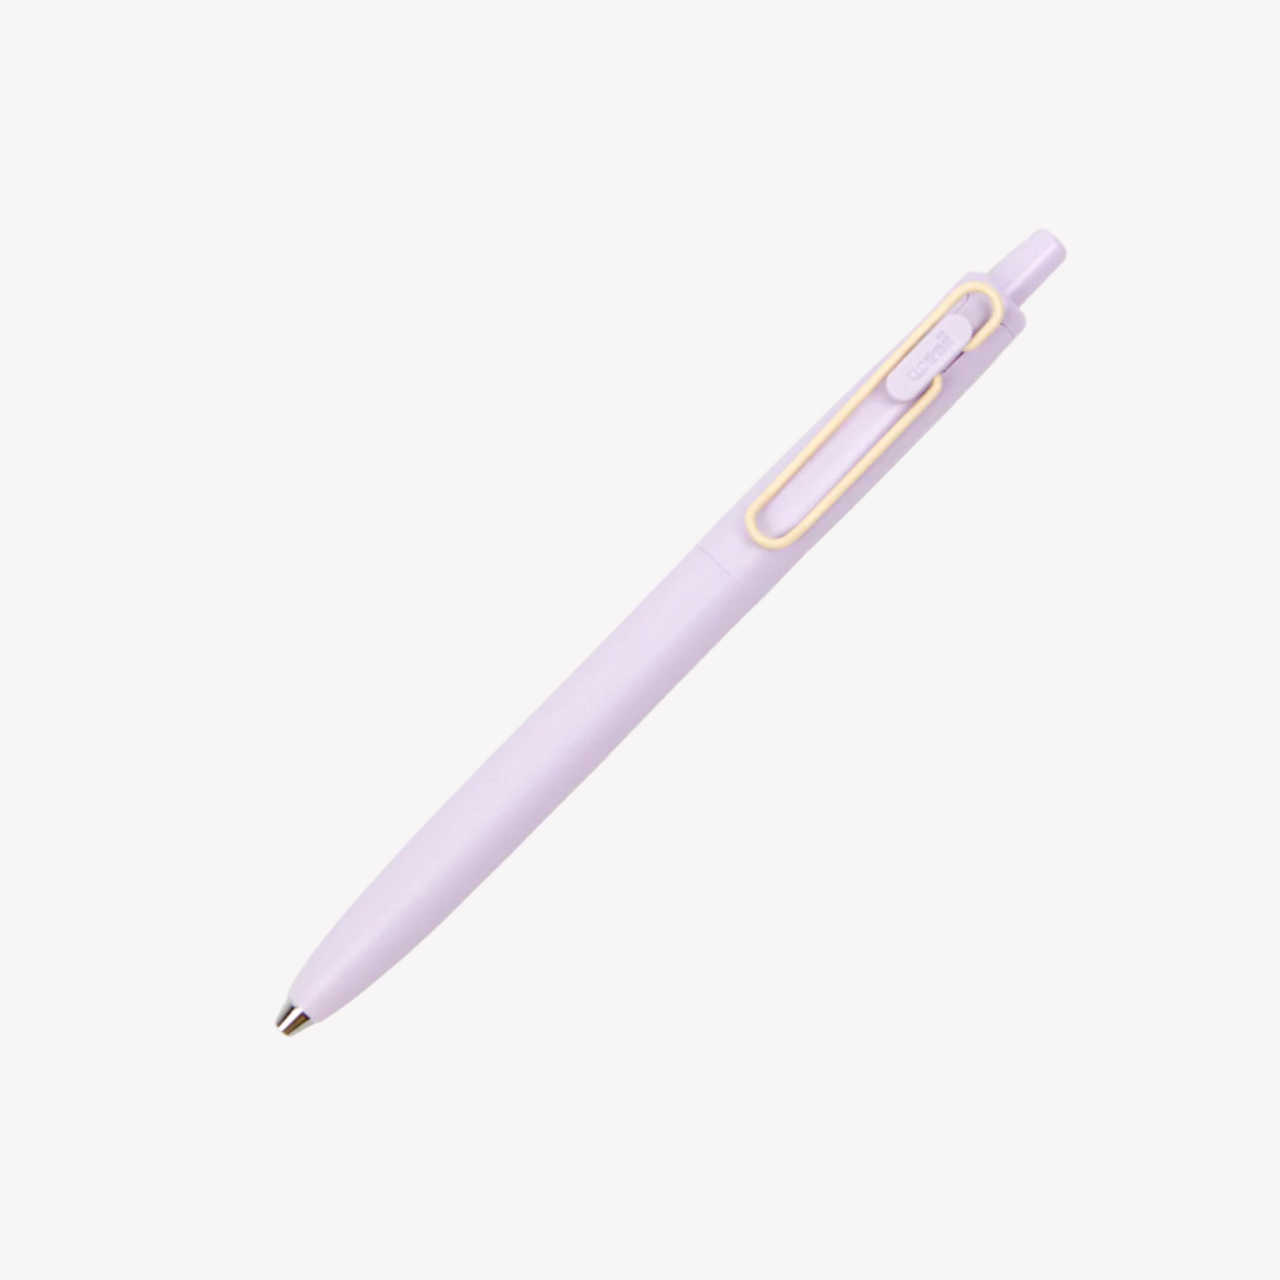 Uni-ball ONE F Modern Pop Gel Rollerball Pen 0.38 / 0.5 (5 Colours, Limited  Edition)